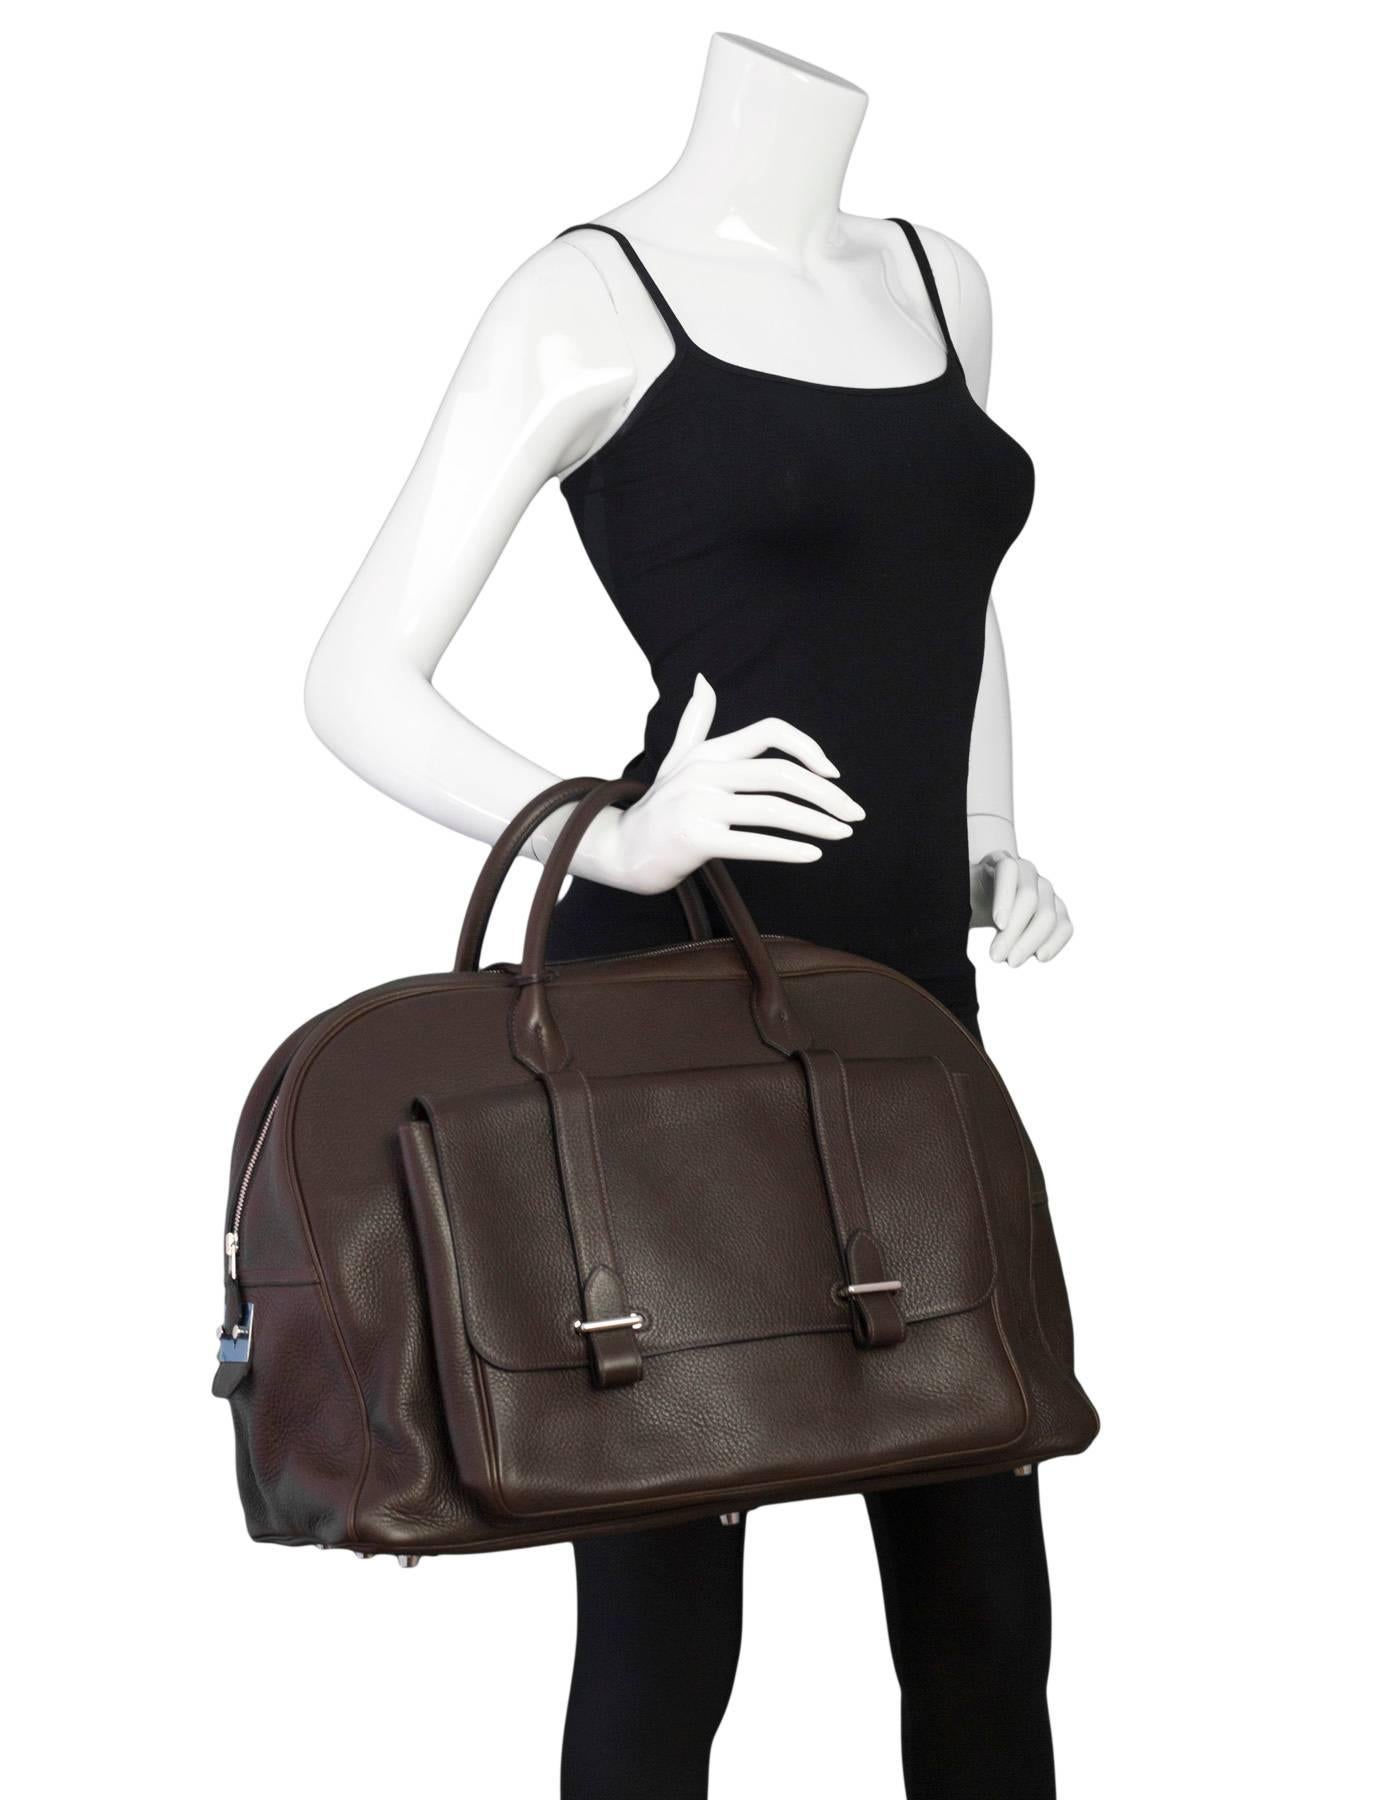 Hermes Cacao Brown Clemence Leather Steve 45 Travel Bag NEW

Made In: France
Year of Production: 2008
Color: Brown
Hardware: Palladium
Materials: Clemence leather
Lining: Tan textile
Closure/Opening: Zip top
Exterior Pockets: Front flap